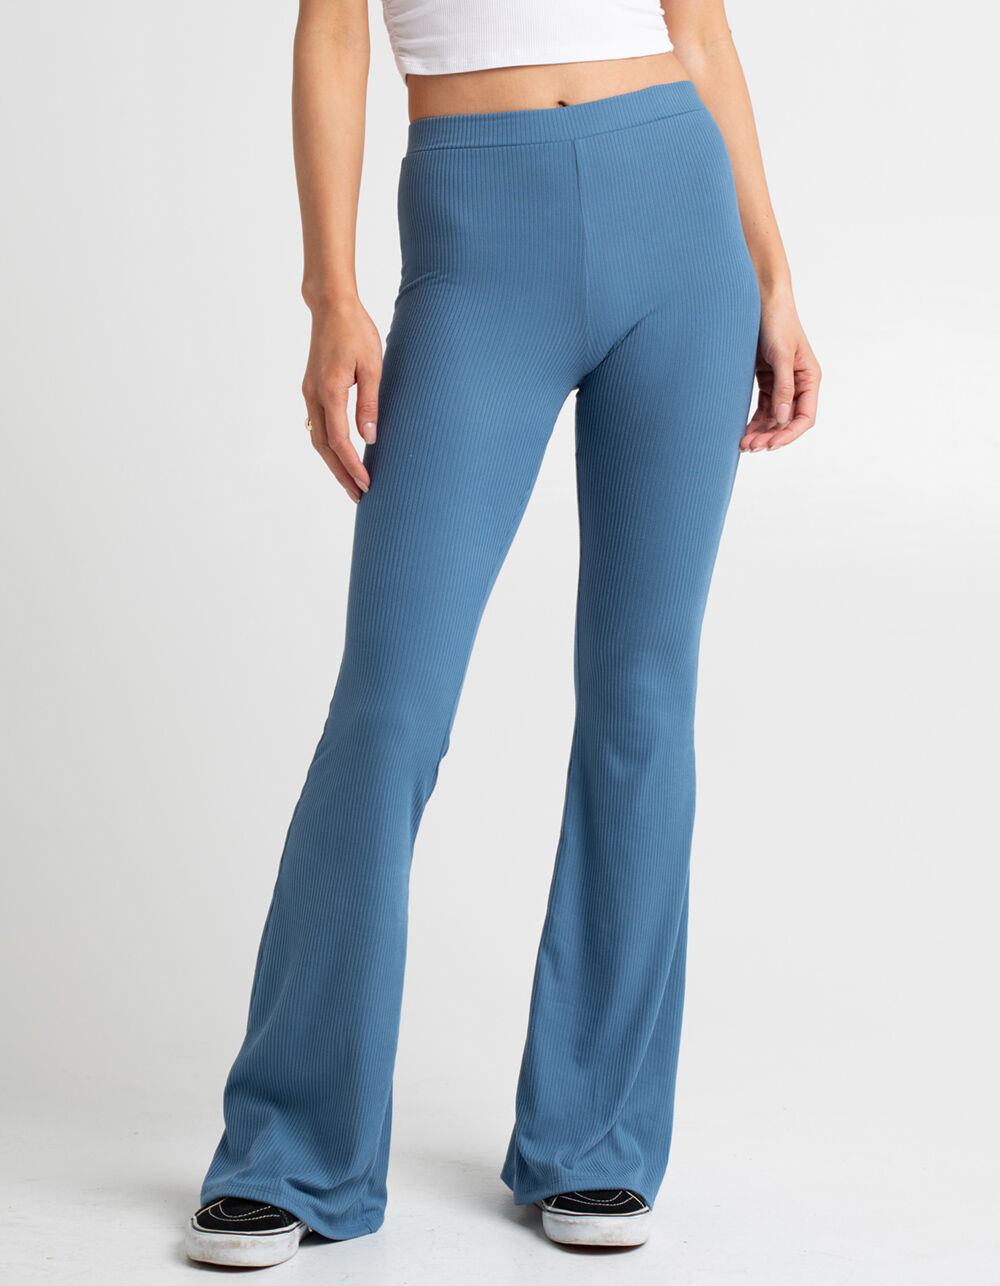 SKY AND SPARROW Rib Flare Womens Pants - BLUE | Tillys